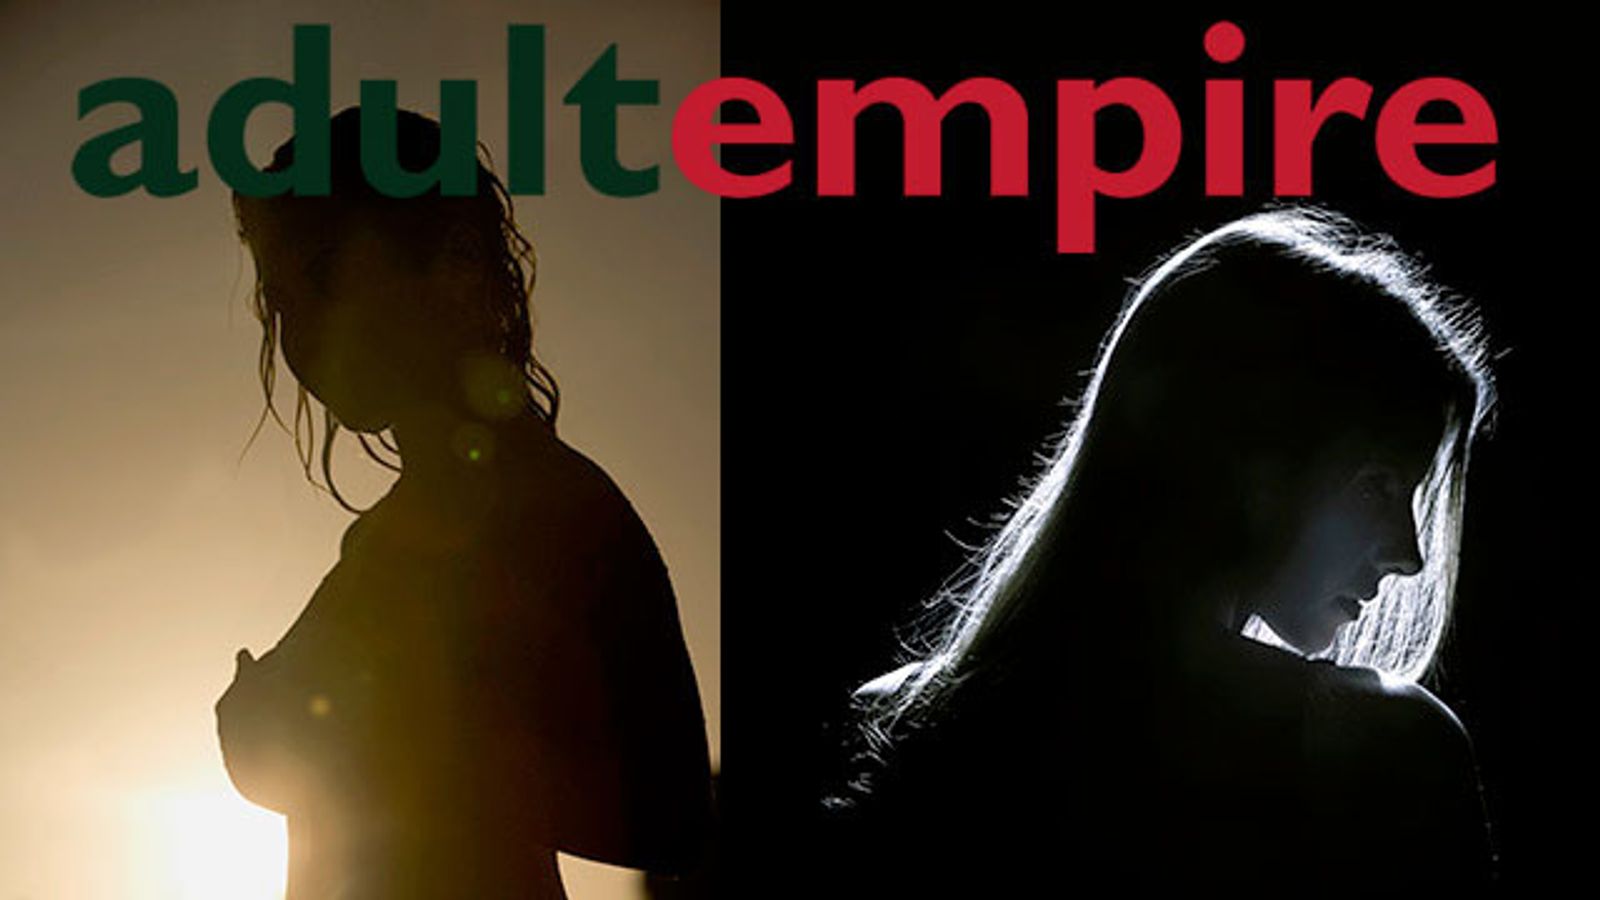 Adult Empire Launches Online Contest To Find 1st ‘Empire Girl’